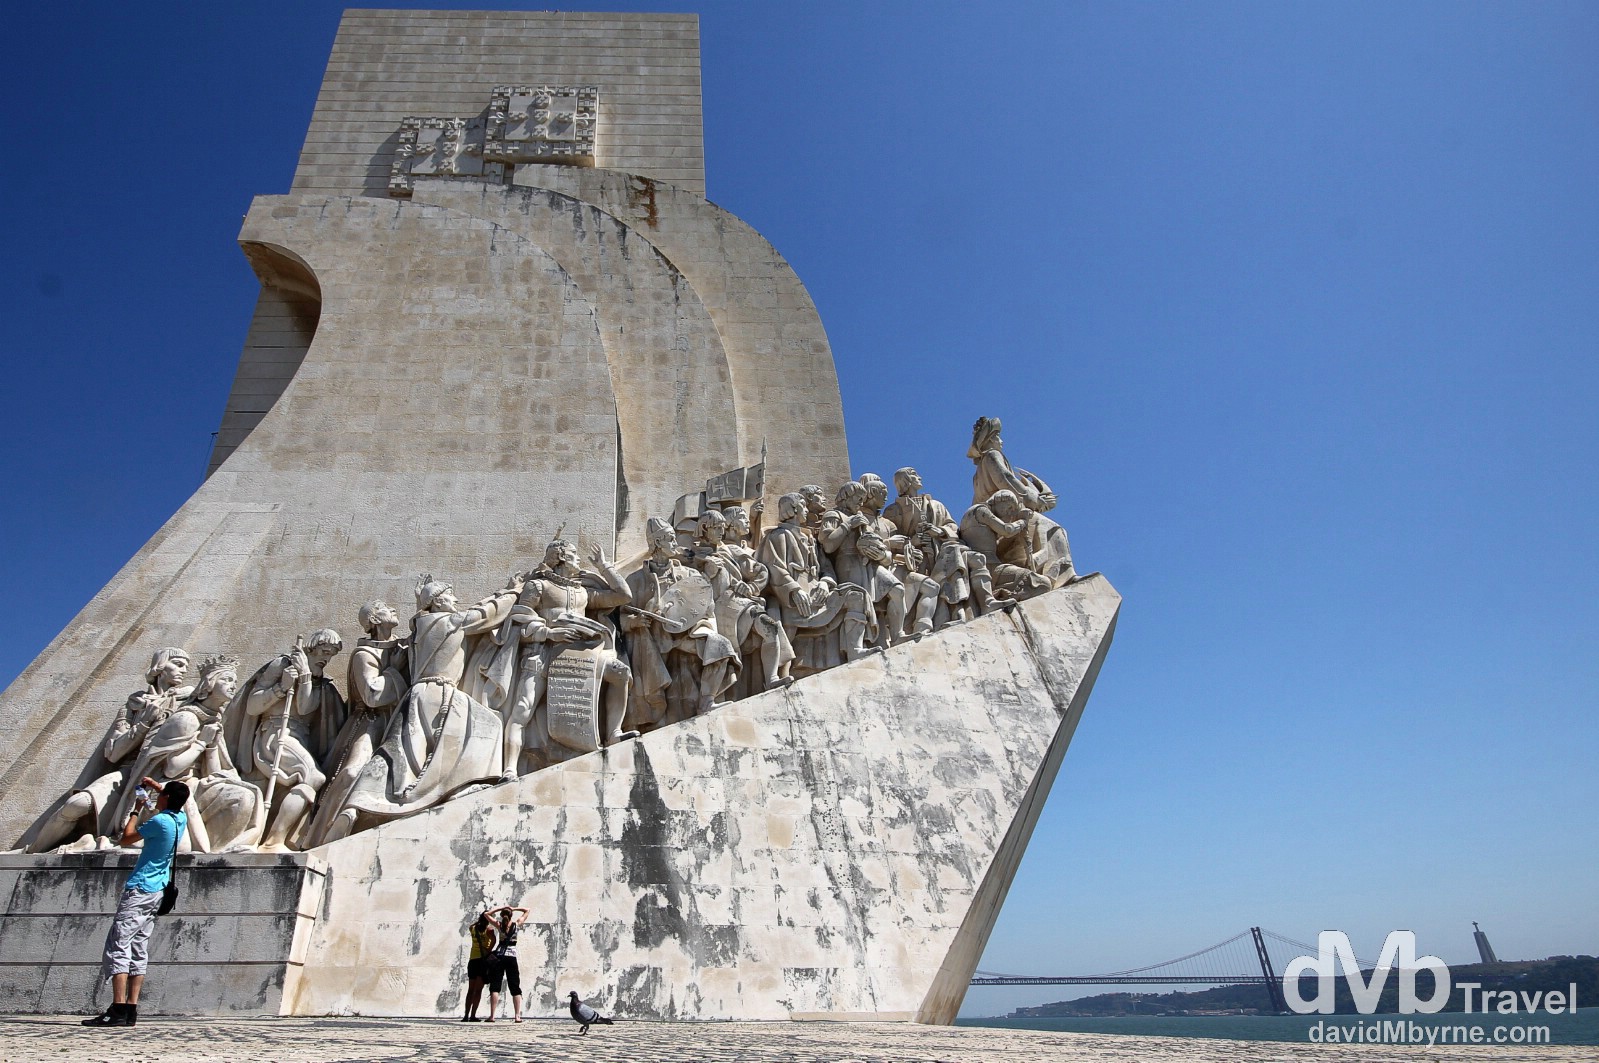 Monument To The Discoveries, Belem, Lisbon, Portugal. August 26th 2013.